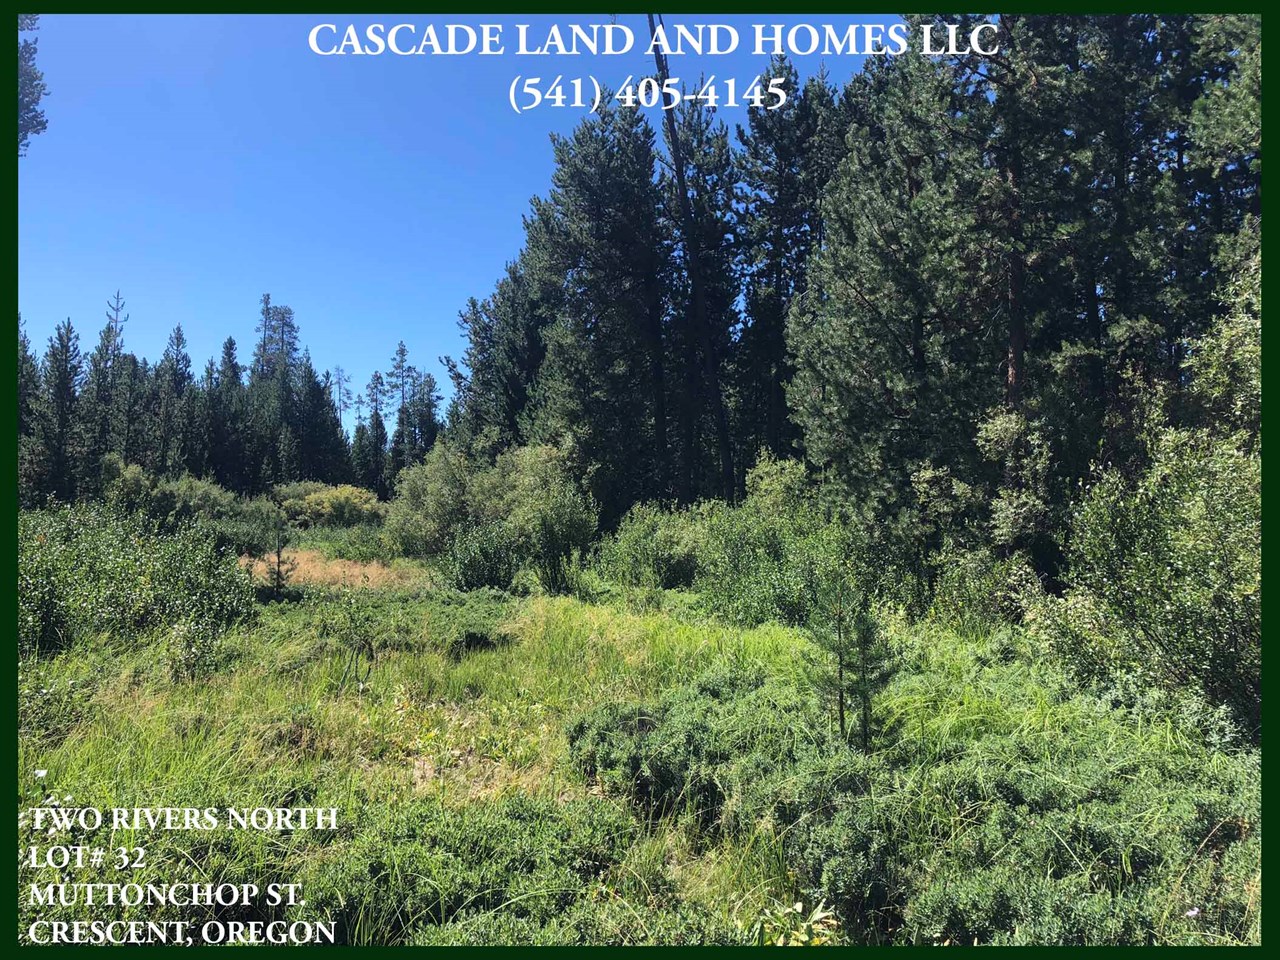 across the back end of the property lies a natural wetland / seasonal creek that in wet years could be a tributary to the little deschutes river that flows through the subdivision. there are  many species of birds and wildlife that are drawn to this lush area on the property.